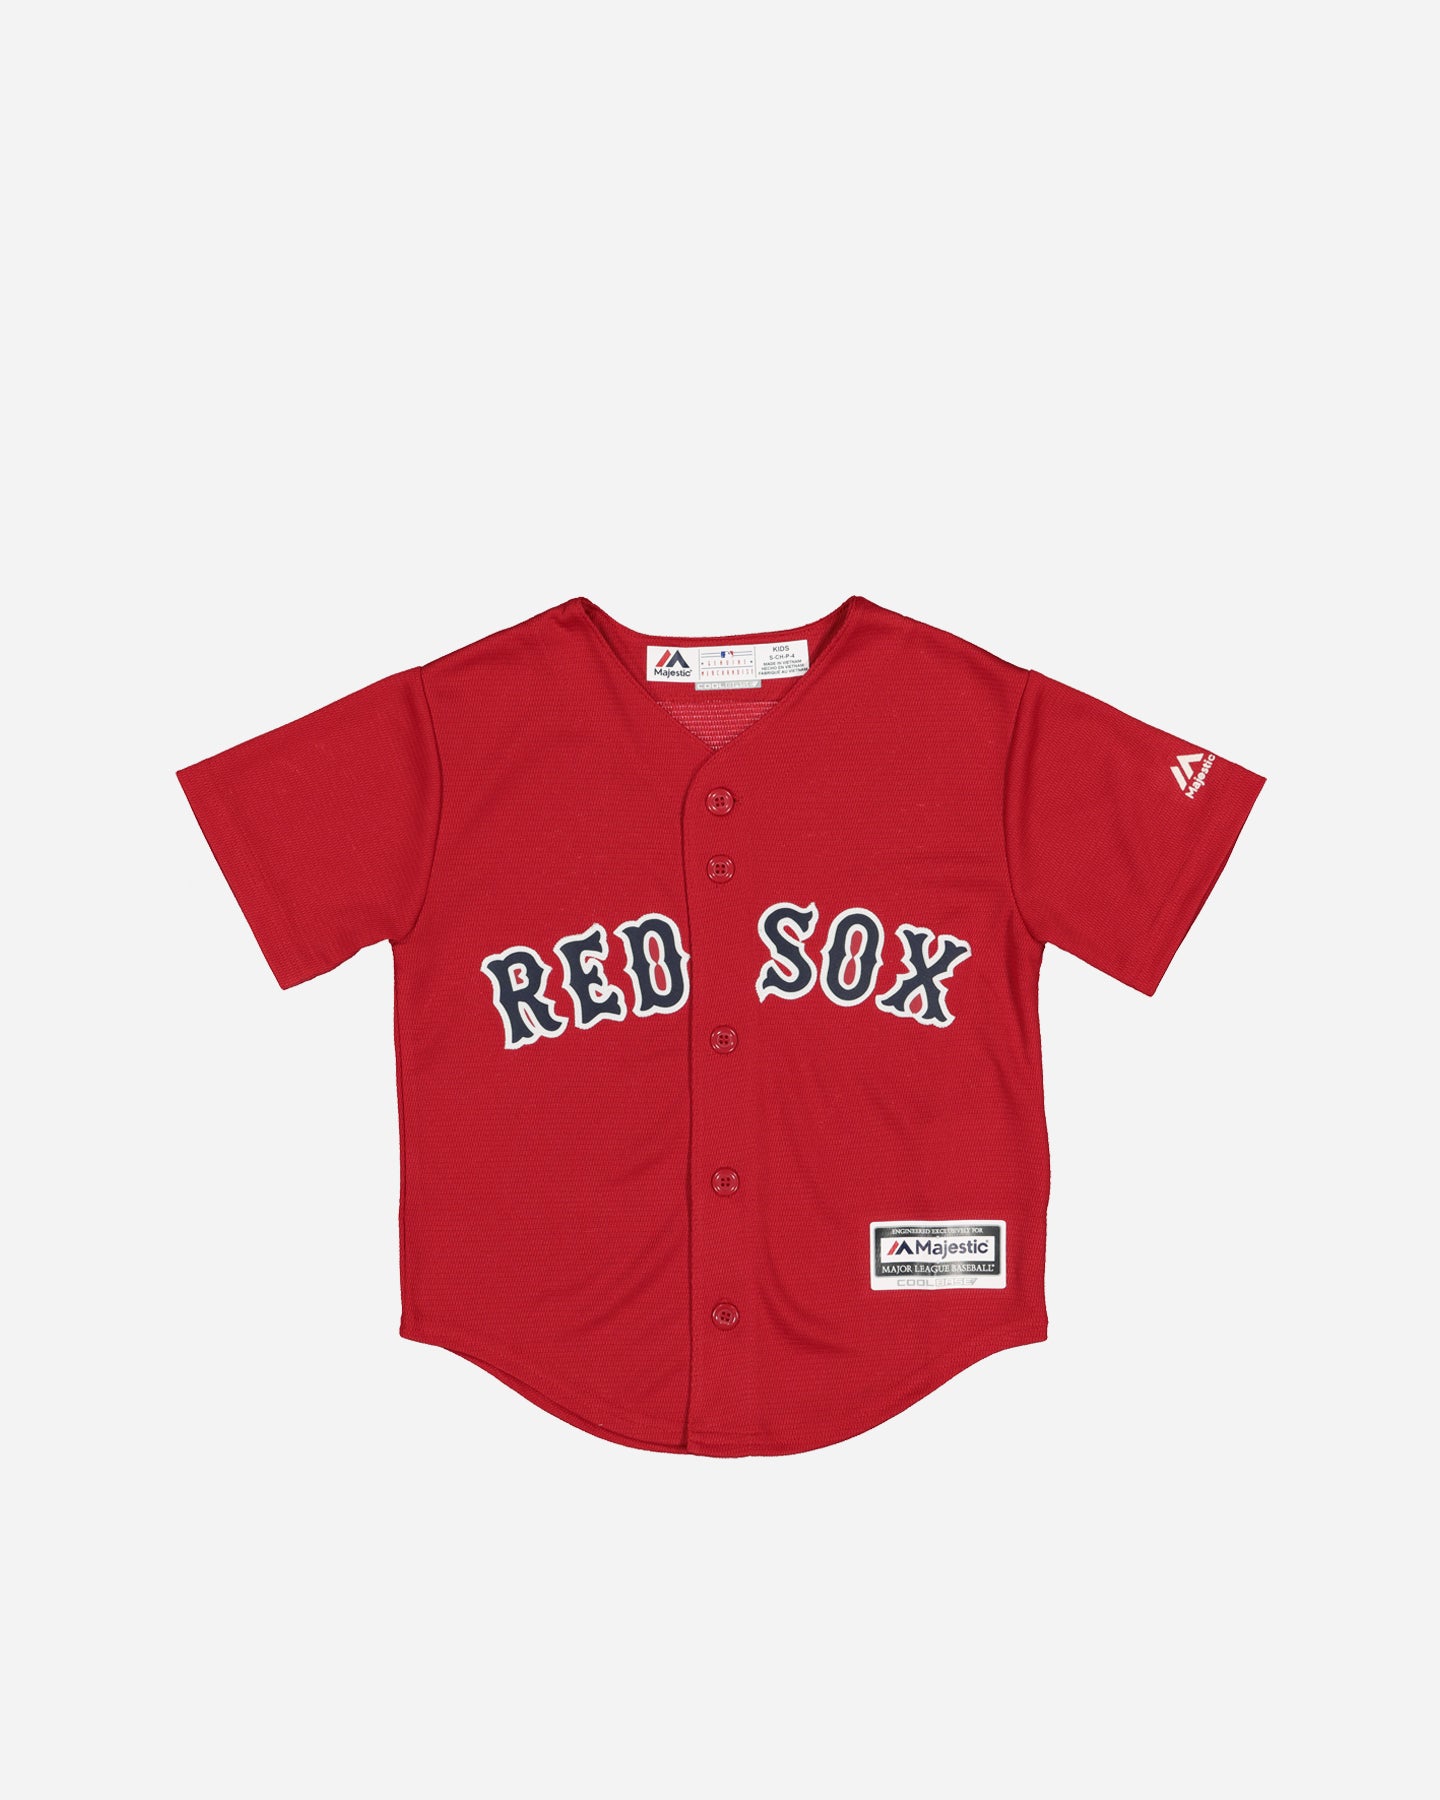 boston red sox toddler jersey